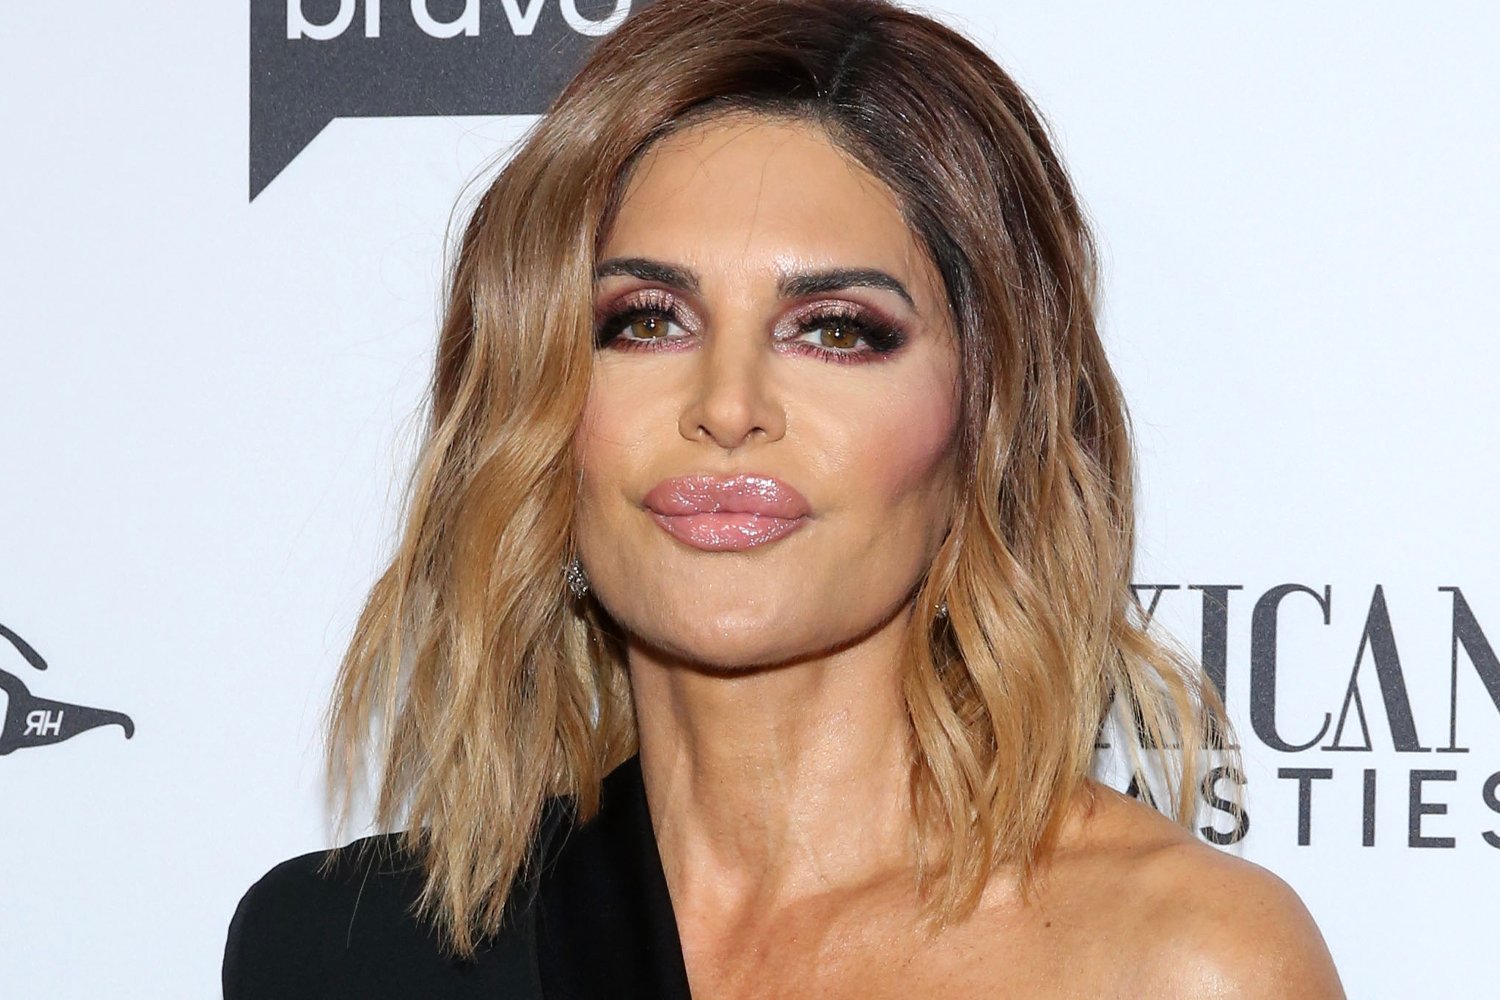 ‘RHOBH’: Lisa Rinna Breaks Silence on Perceived Hypocrisy for Not Calling out Erika Jayne Like She Did Denise Richards